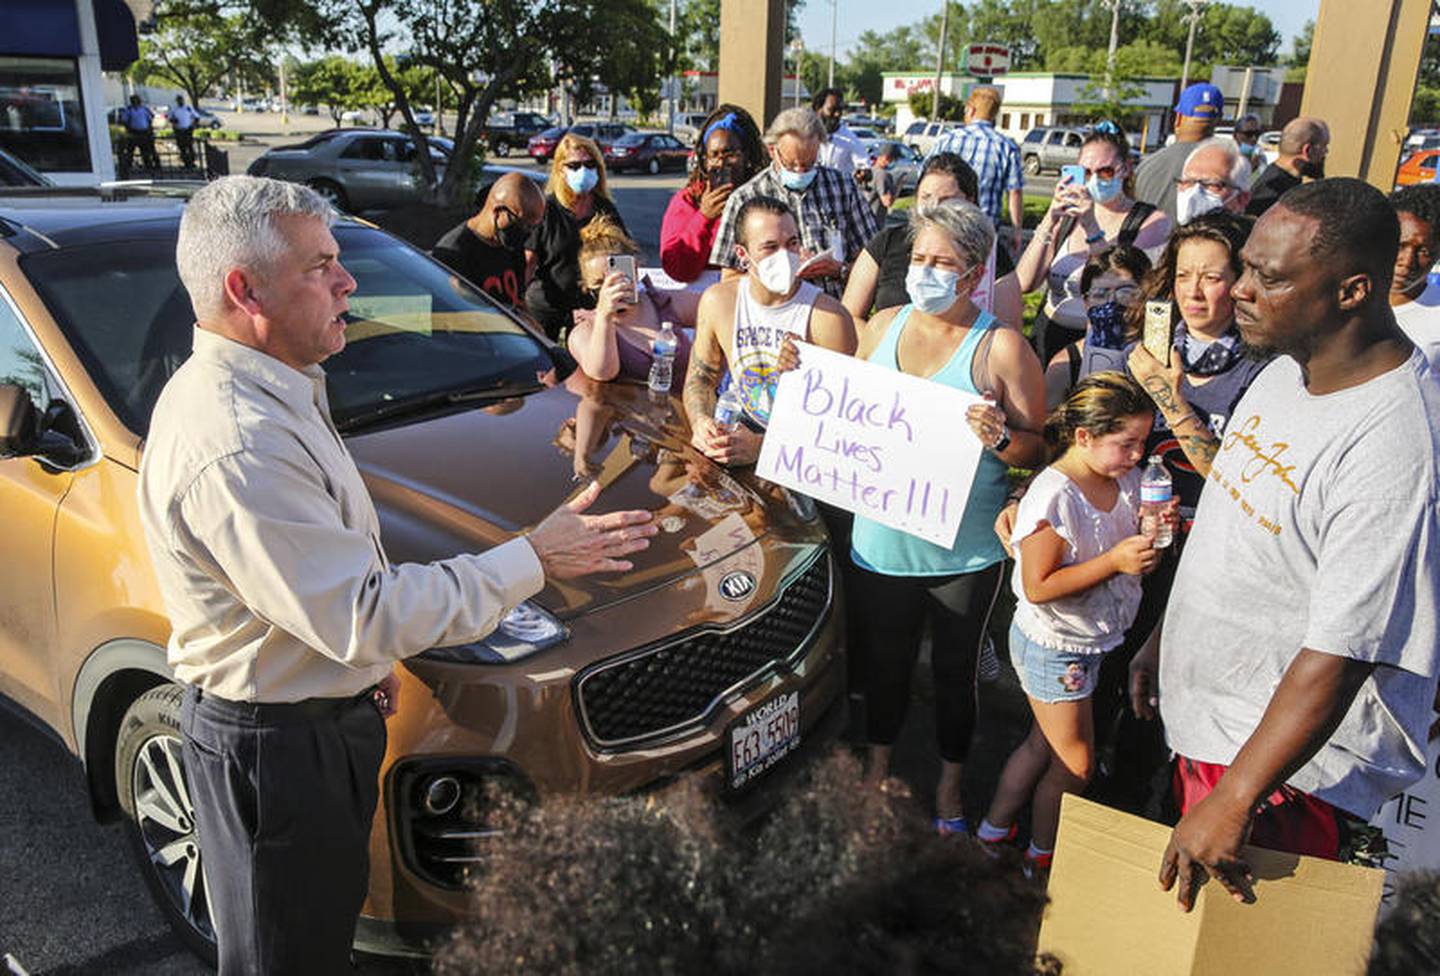 Peaceful protestors speak with Mayor Bob O'Dekirk and members of the city council Tuesday, June 2, 2020 after O'Dekirk grabbed a man and threw him to the ground during the demonstration early Monday morning.